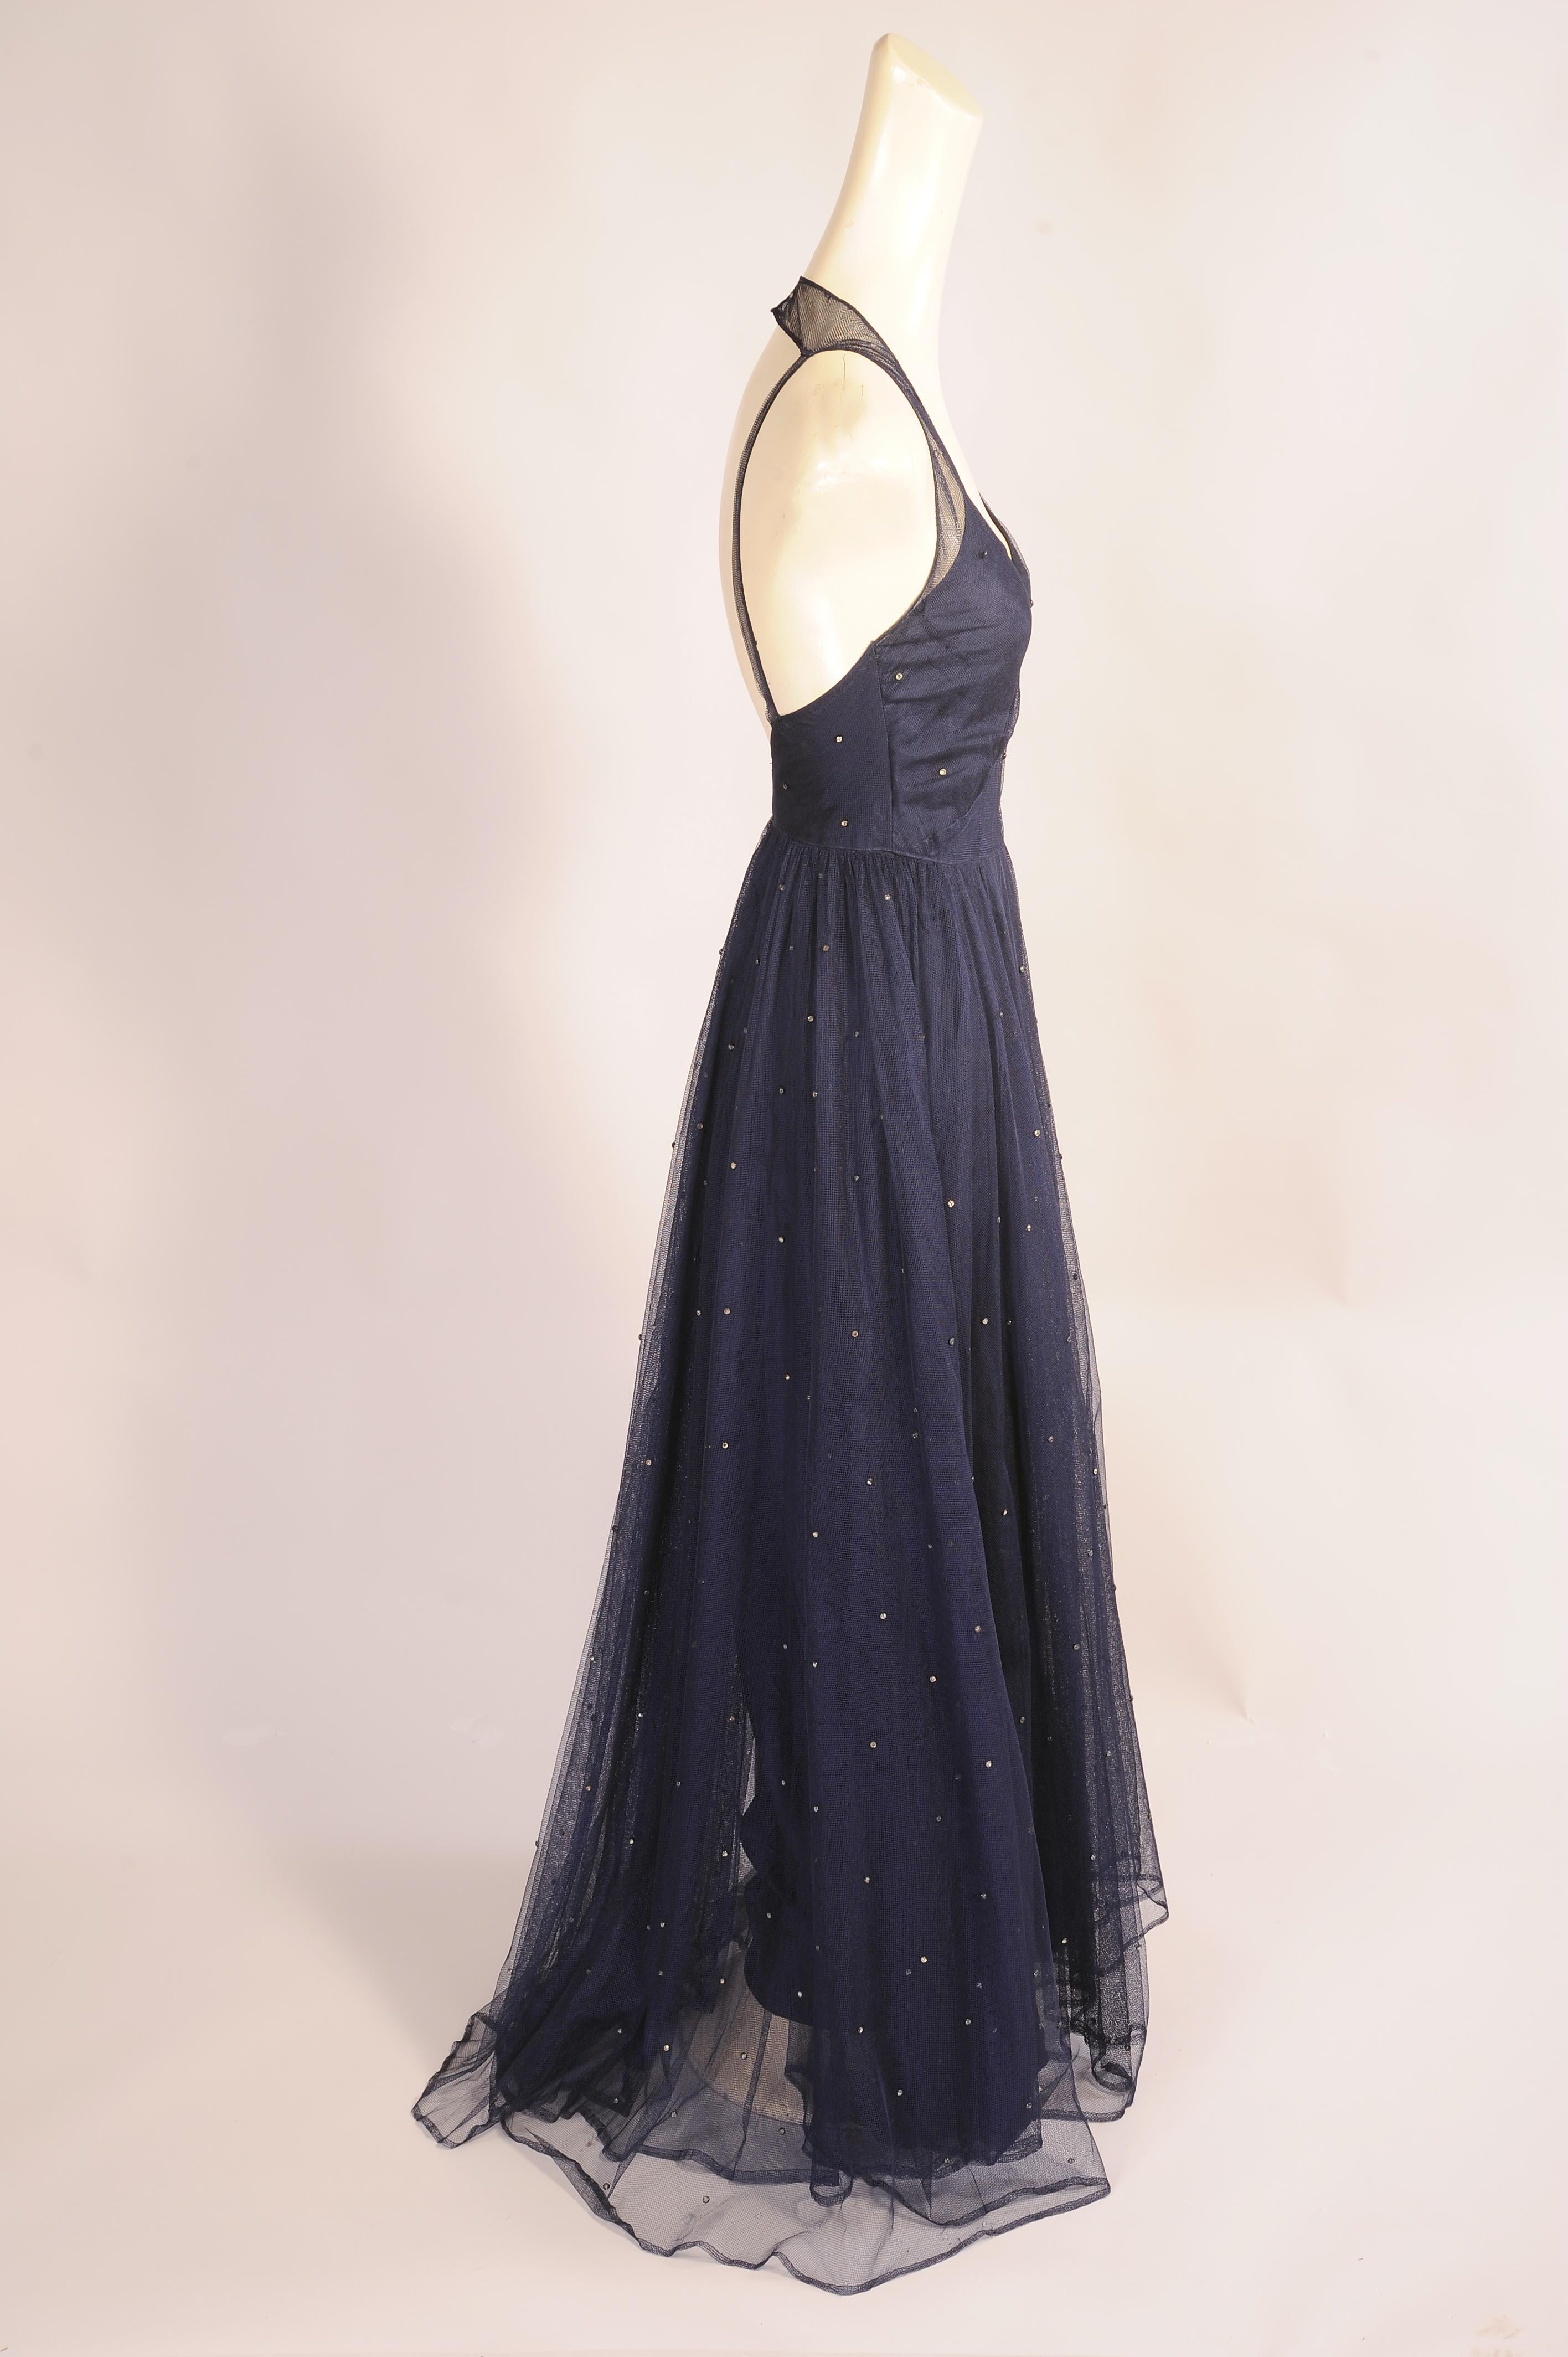 Like twinkling stars in the night sky, rhinestones glisten on this beautiful 1930's cotton net dress. It has a halter style neckline with narrow straps at the back. The fitted bodice has a left side metal zipper and the skirt is two layers of tulle.